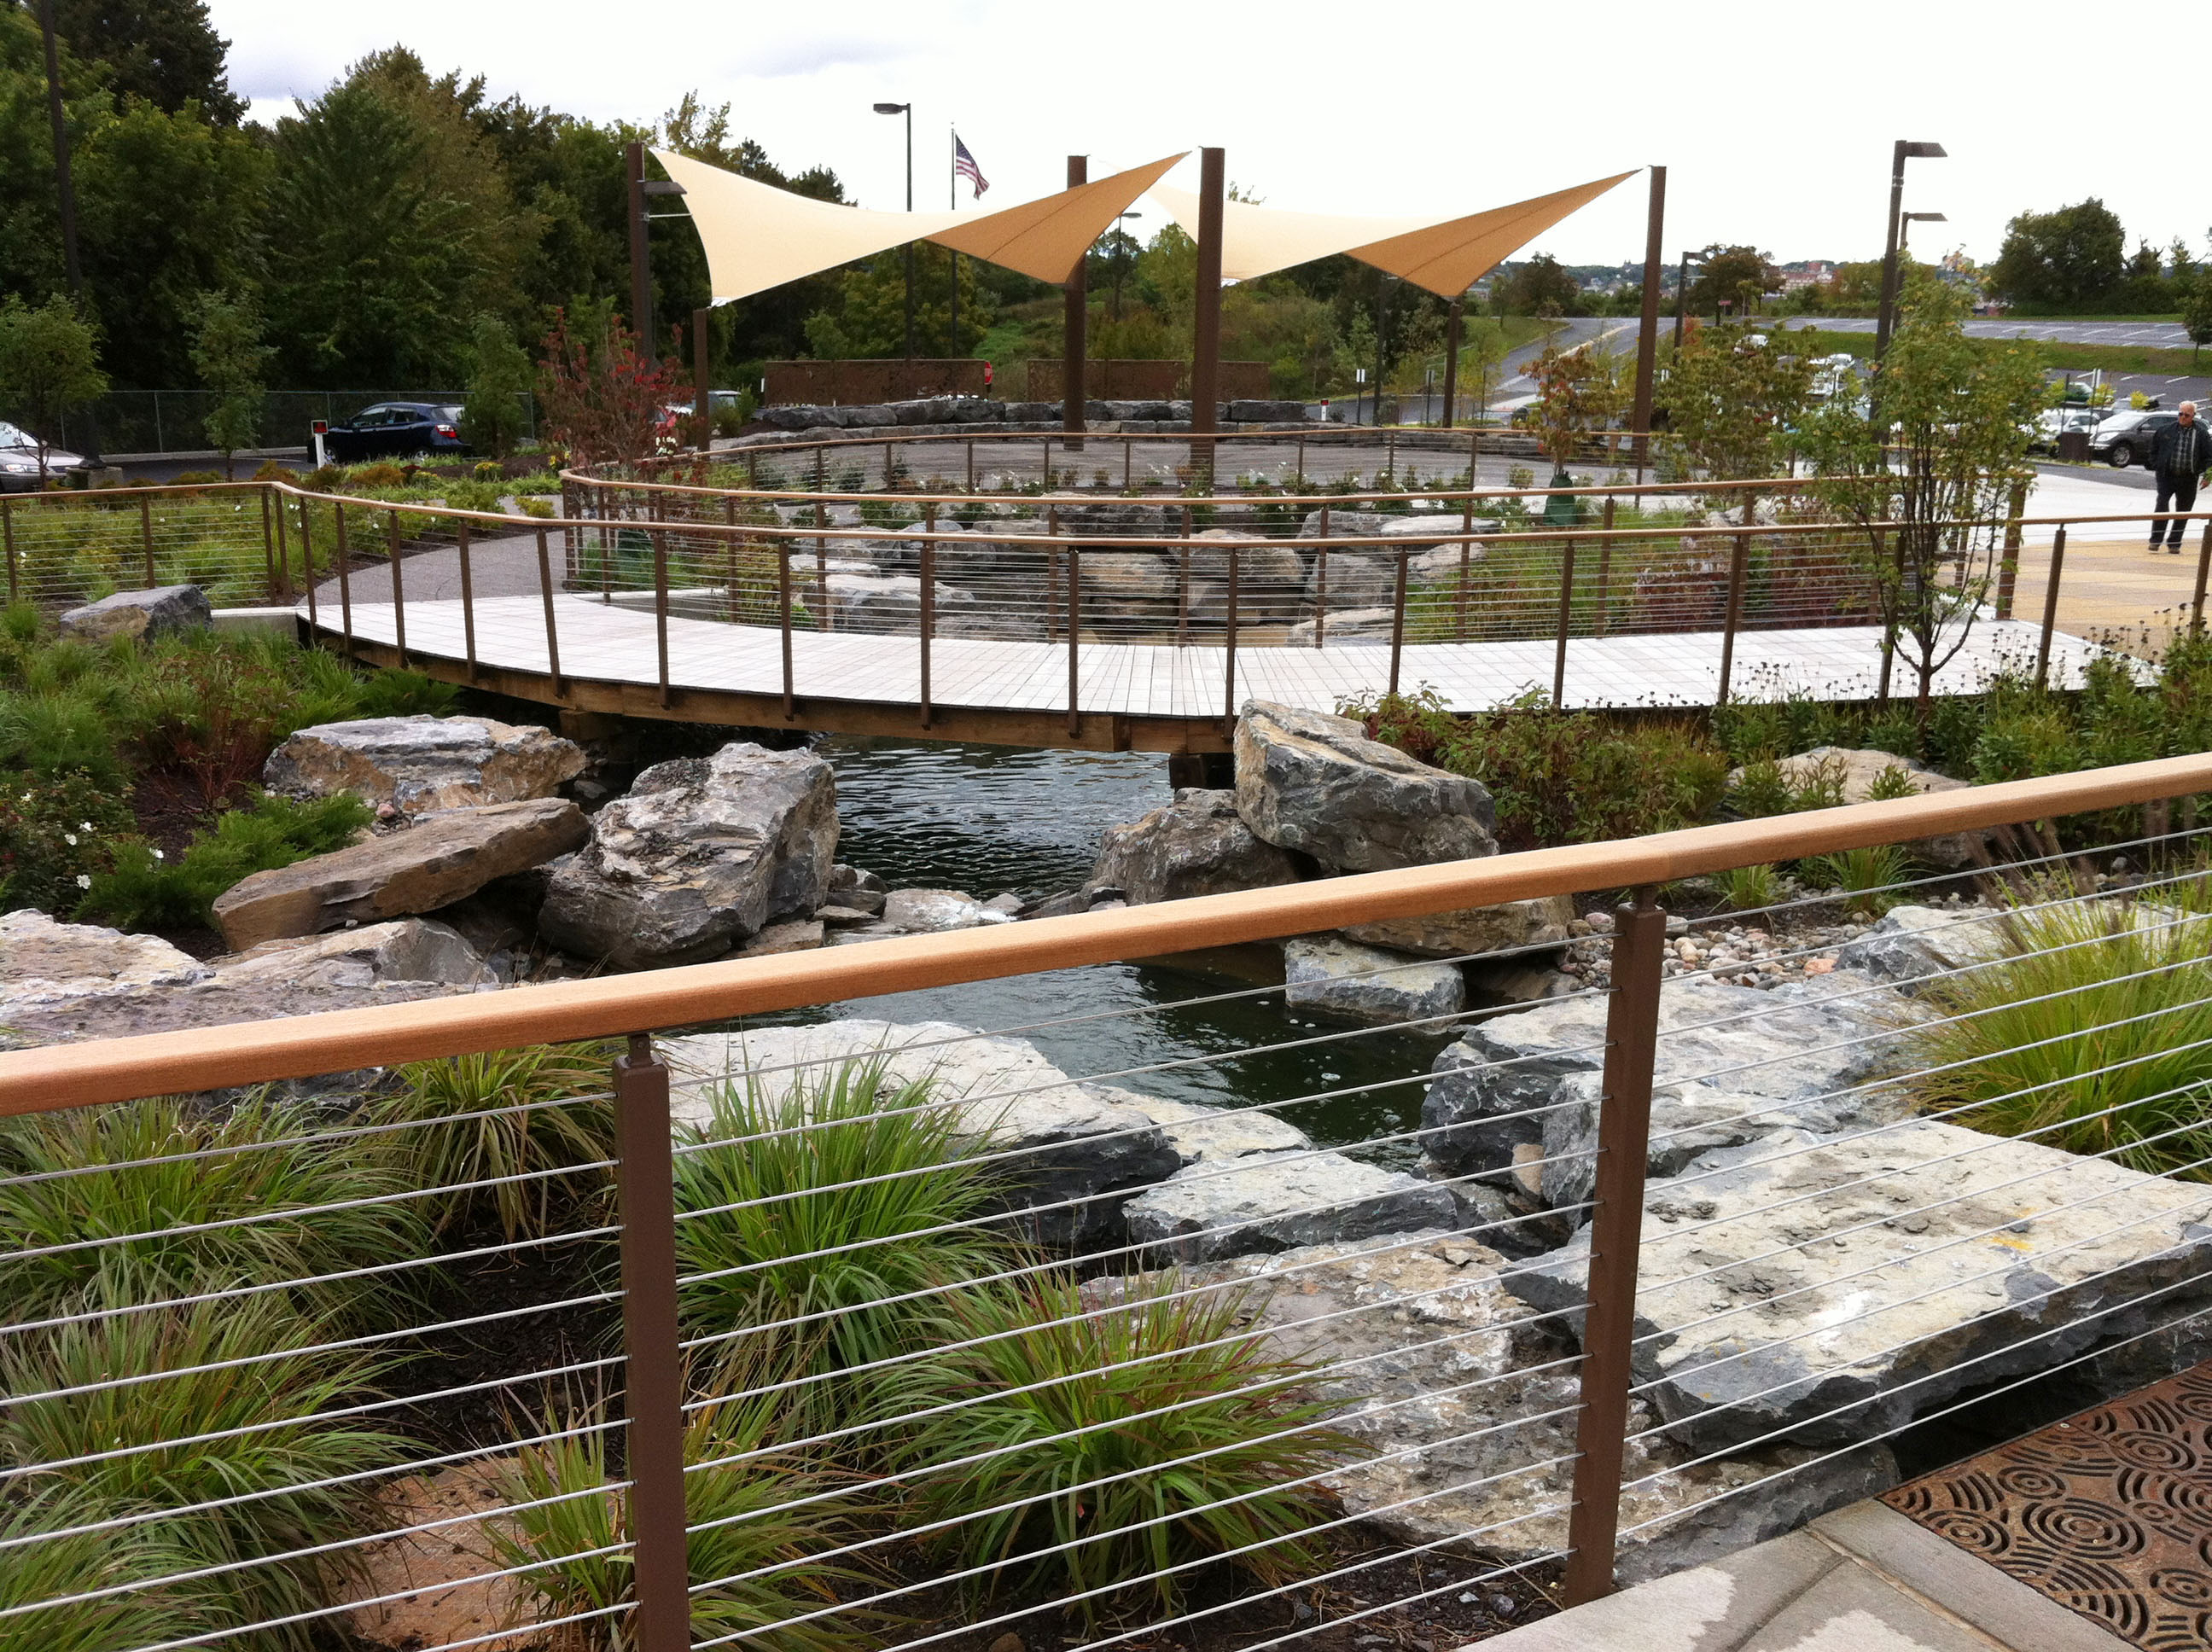 Keuka Studios colloborated with Rosamond Gifford Zoo to create cable railings for an outdoor oasis